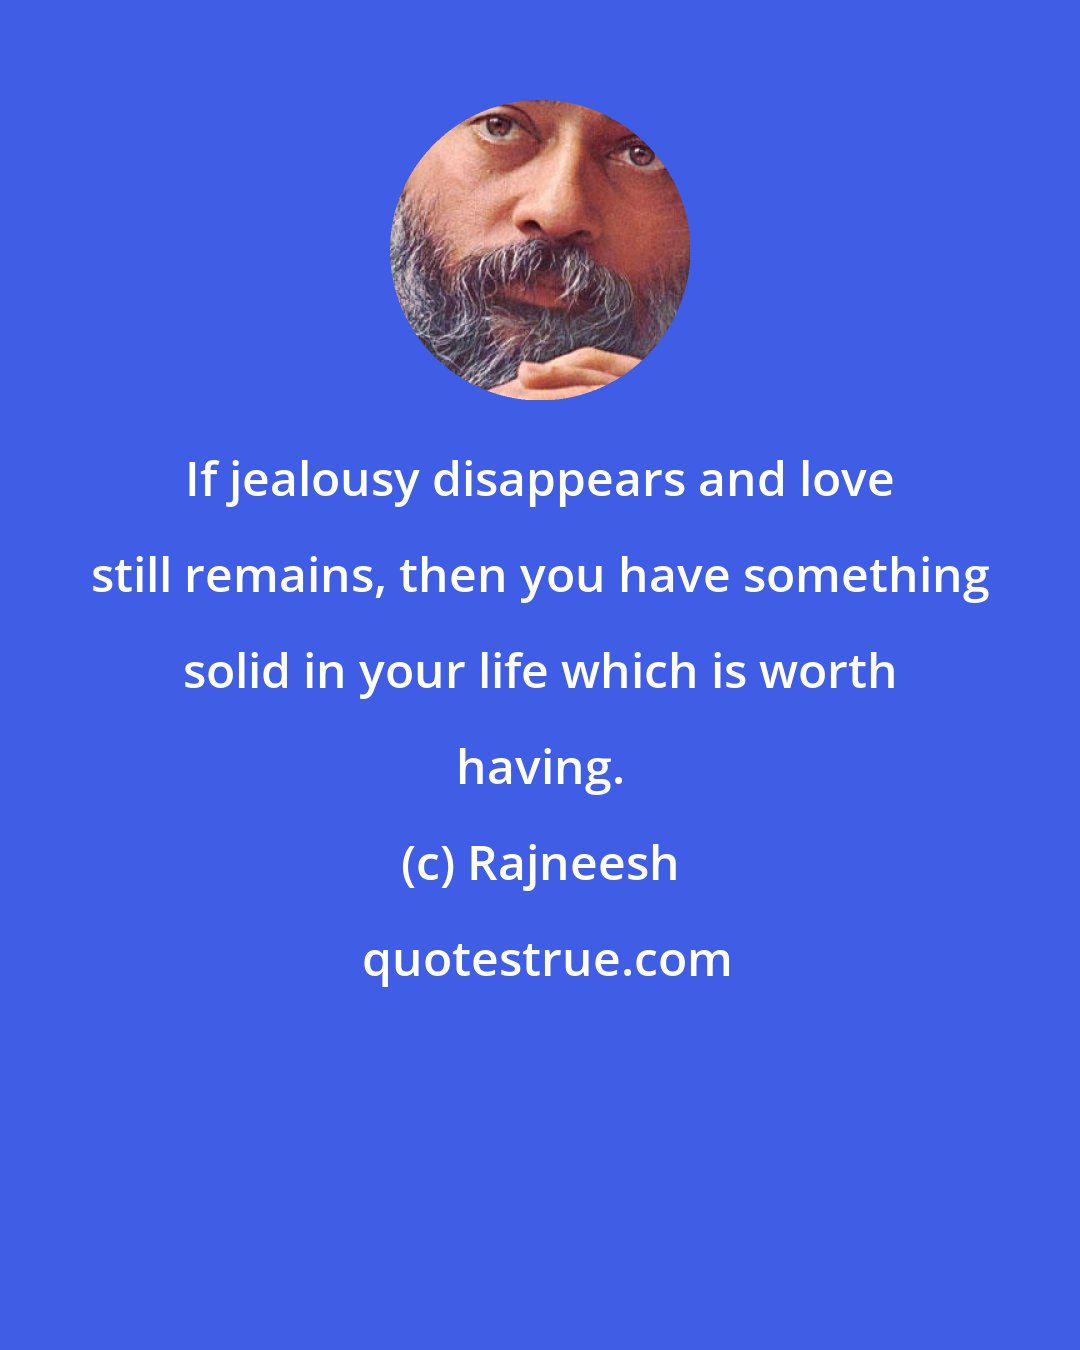 Rajneesh: If jealousy disappears and love still remains, then you have something solid in your life which is worth having.